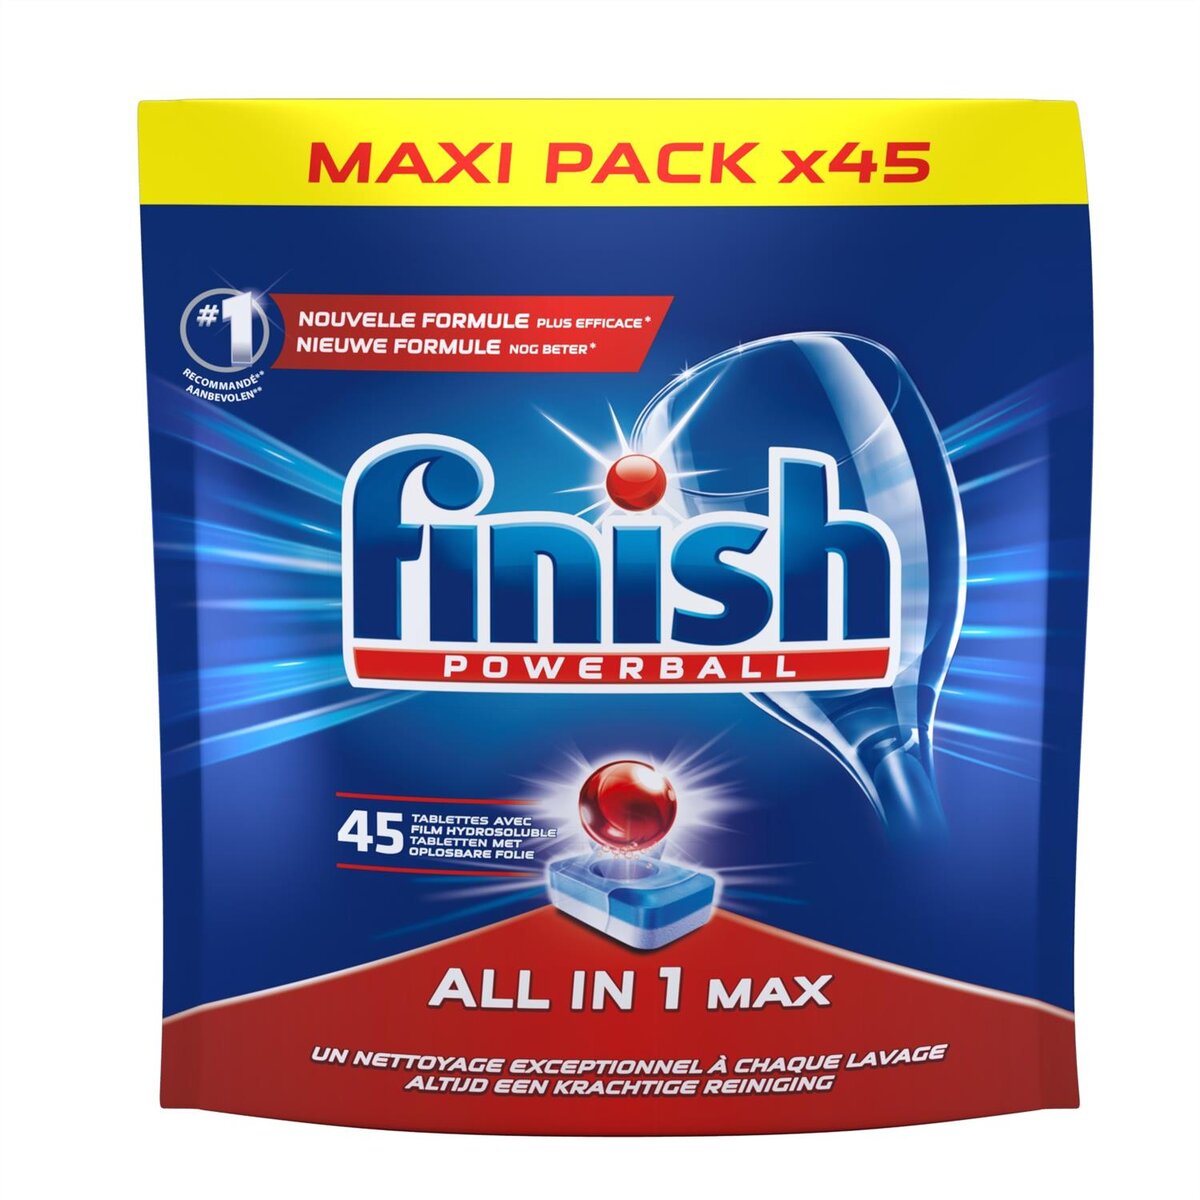 Pastilles Lave-Vaisselle Powerball All in One Max - 45 Tablettes Lave-Vaisselle  FINISH - La Poste